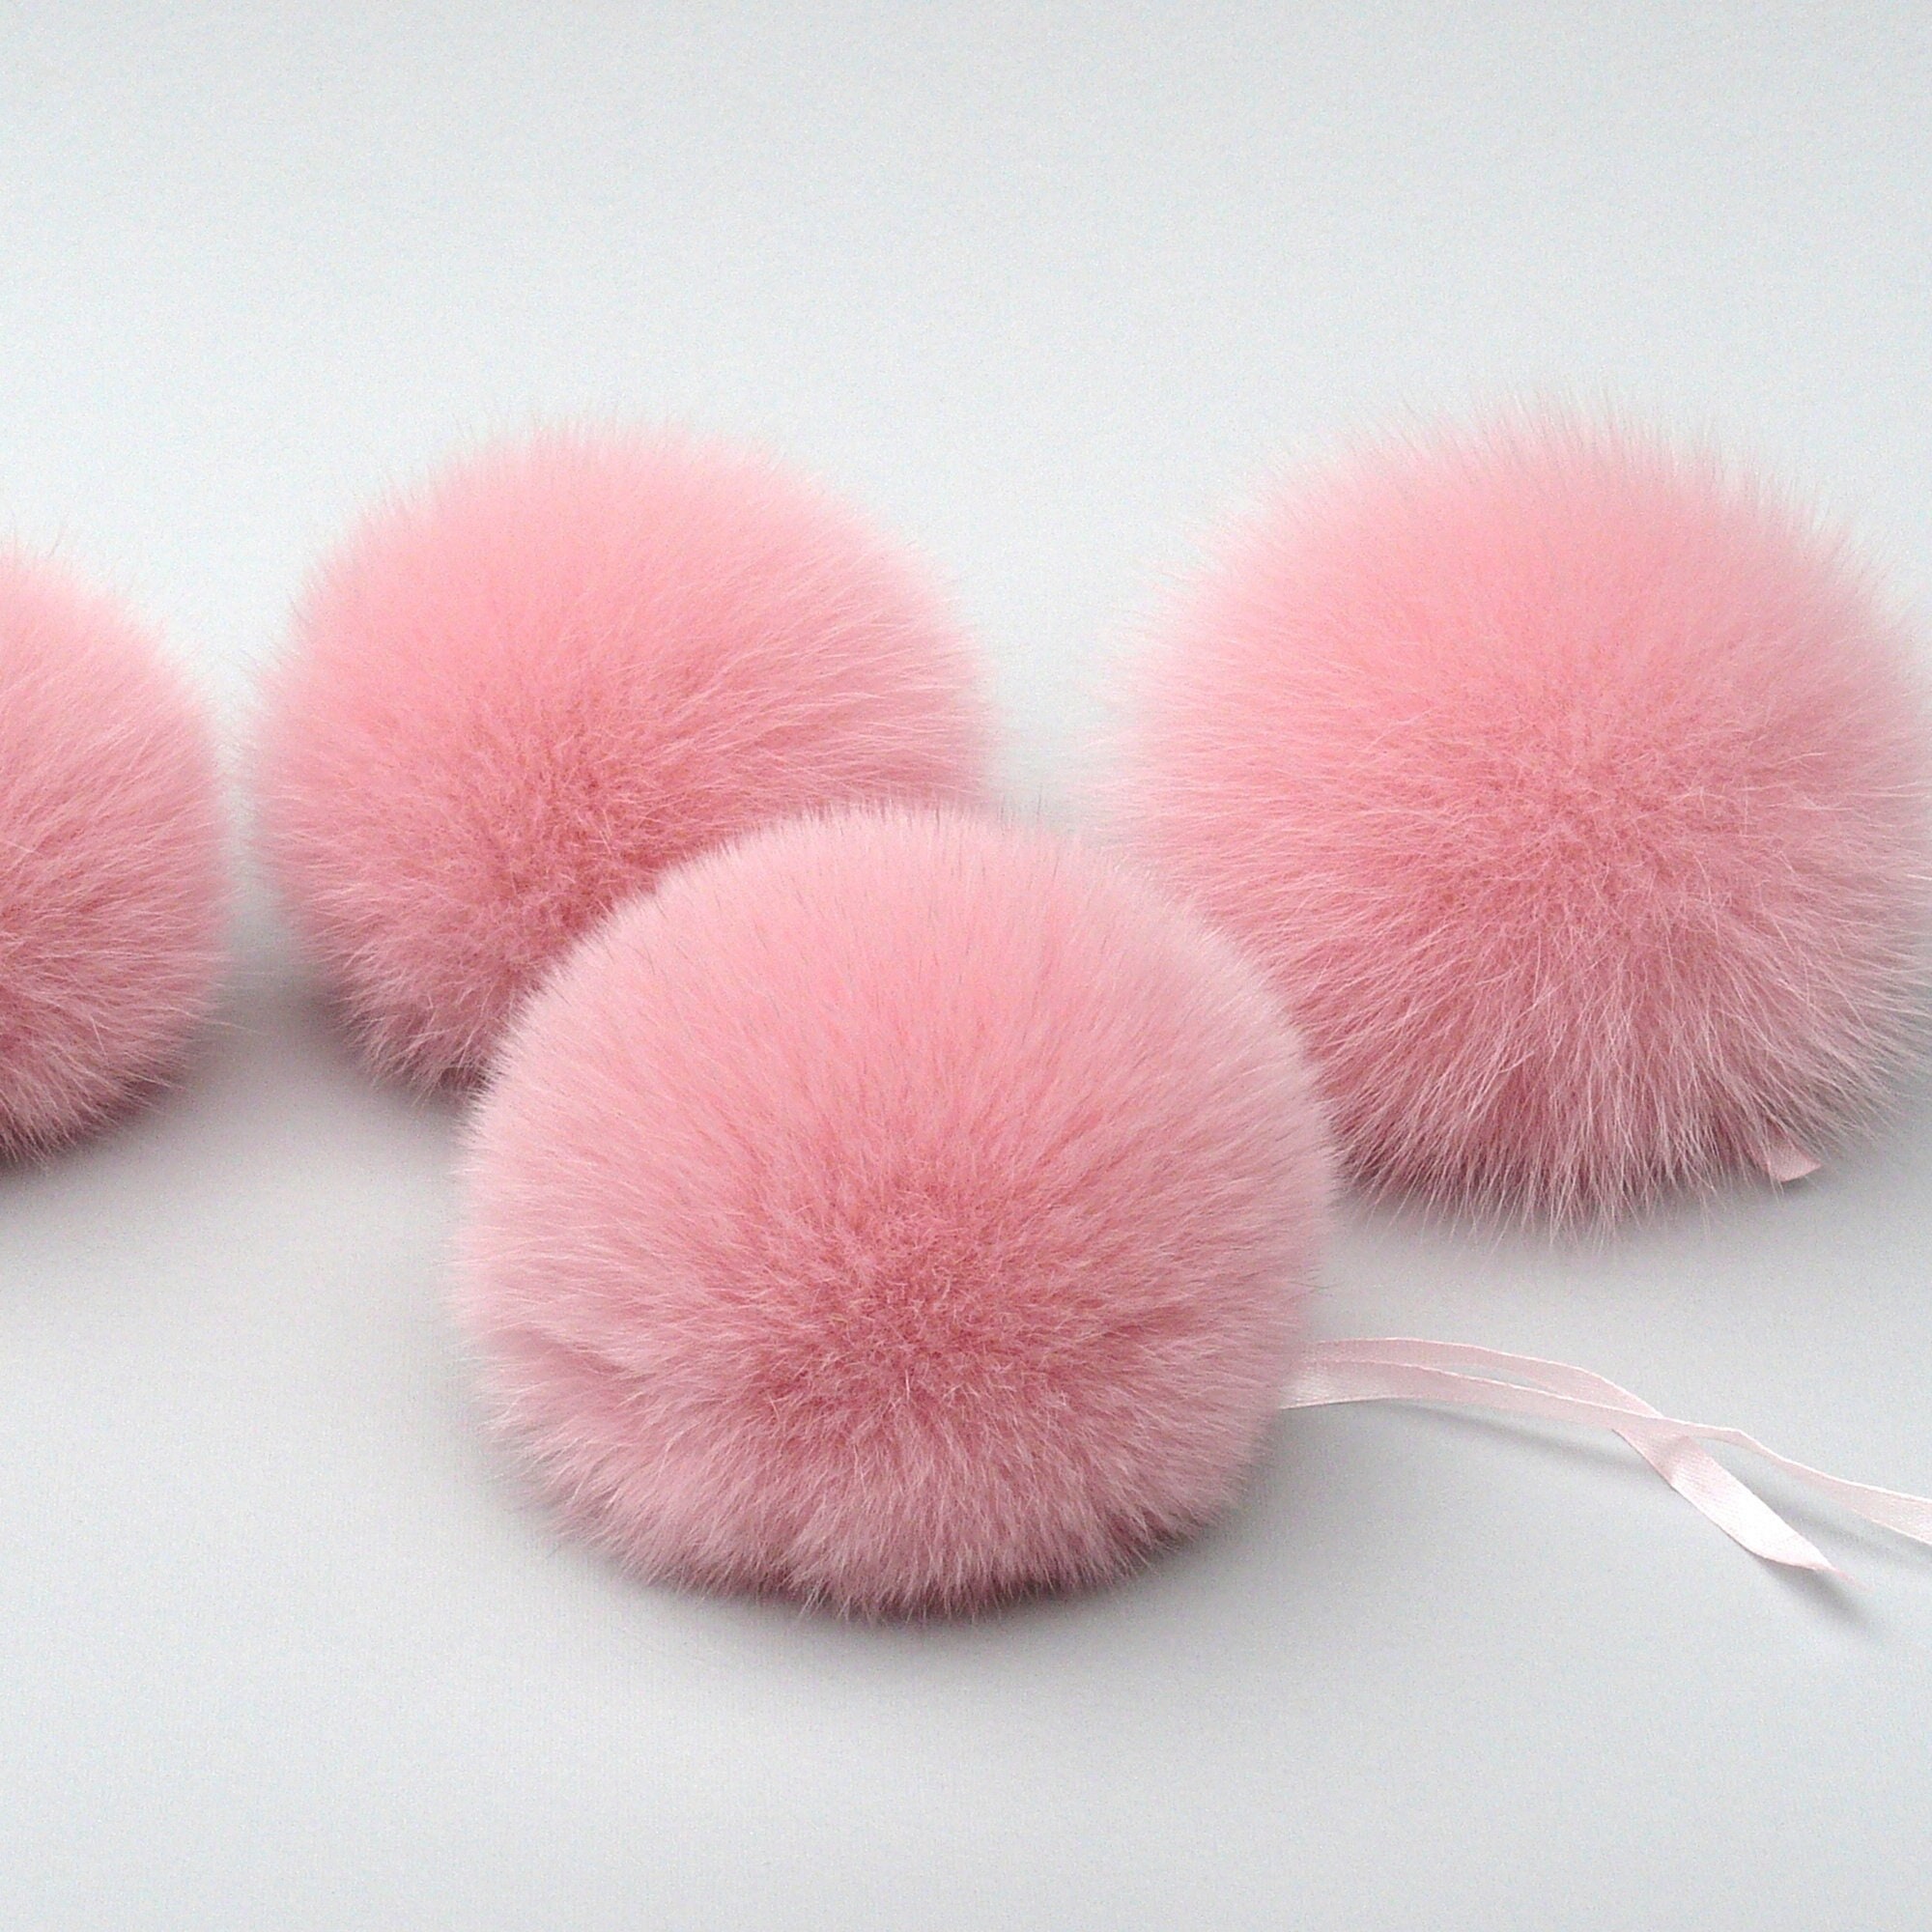 Luxury Multicolor Pink Cream Tan and Grey Pom Pom for Hat Large Pastel  Pompom With Long Pile Faux Fur Detachable Super Soft Fluffy Puff Ball 